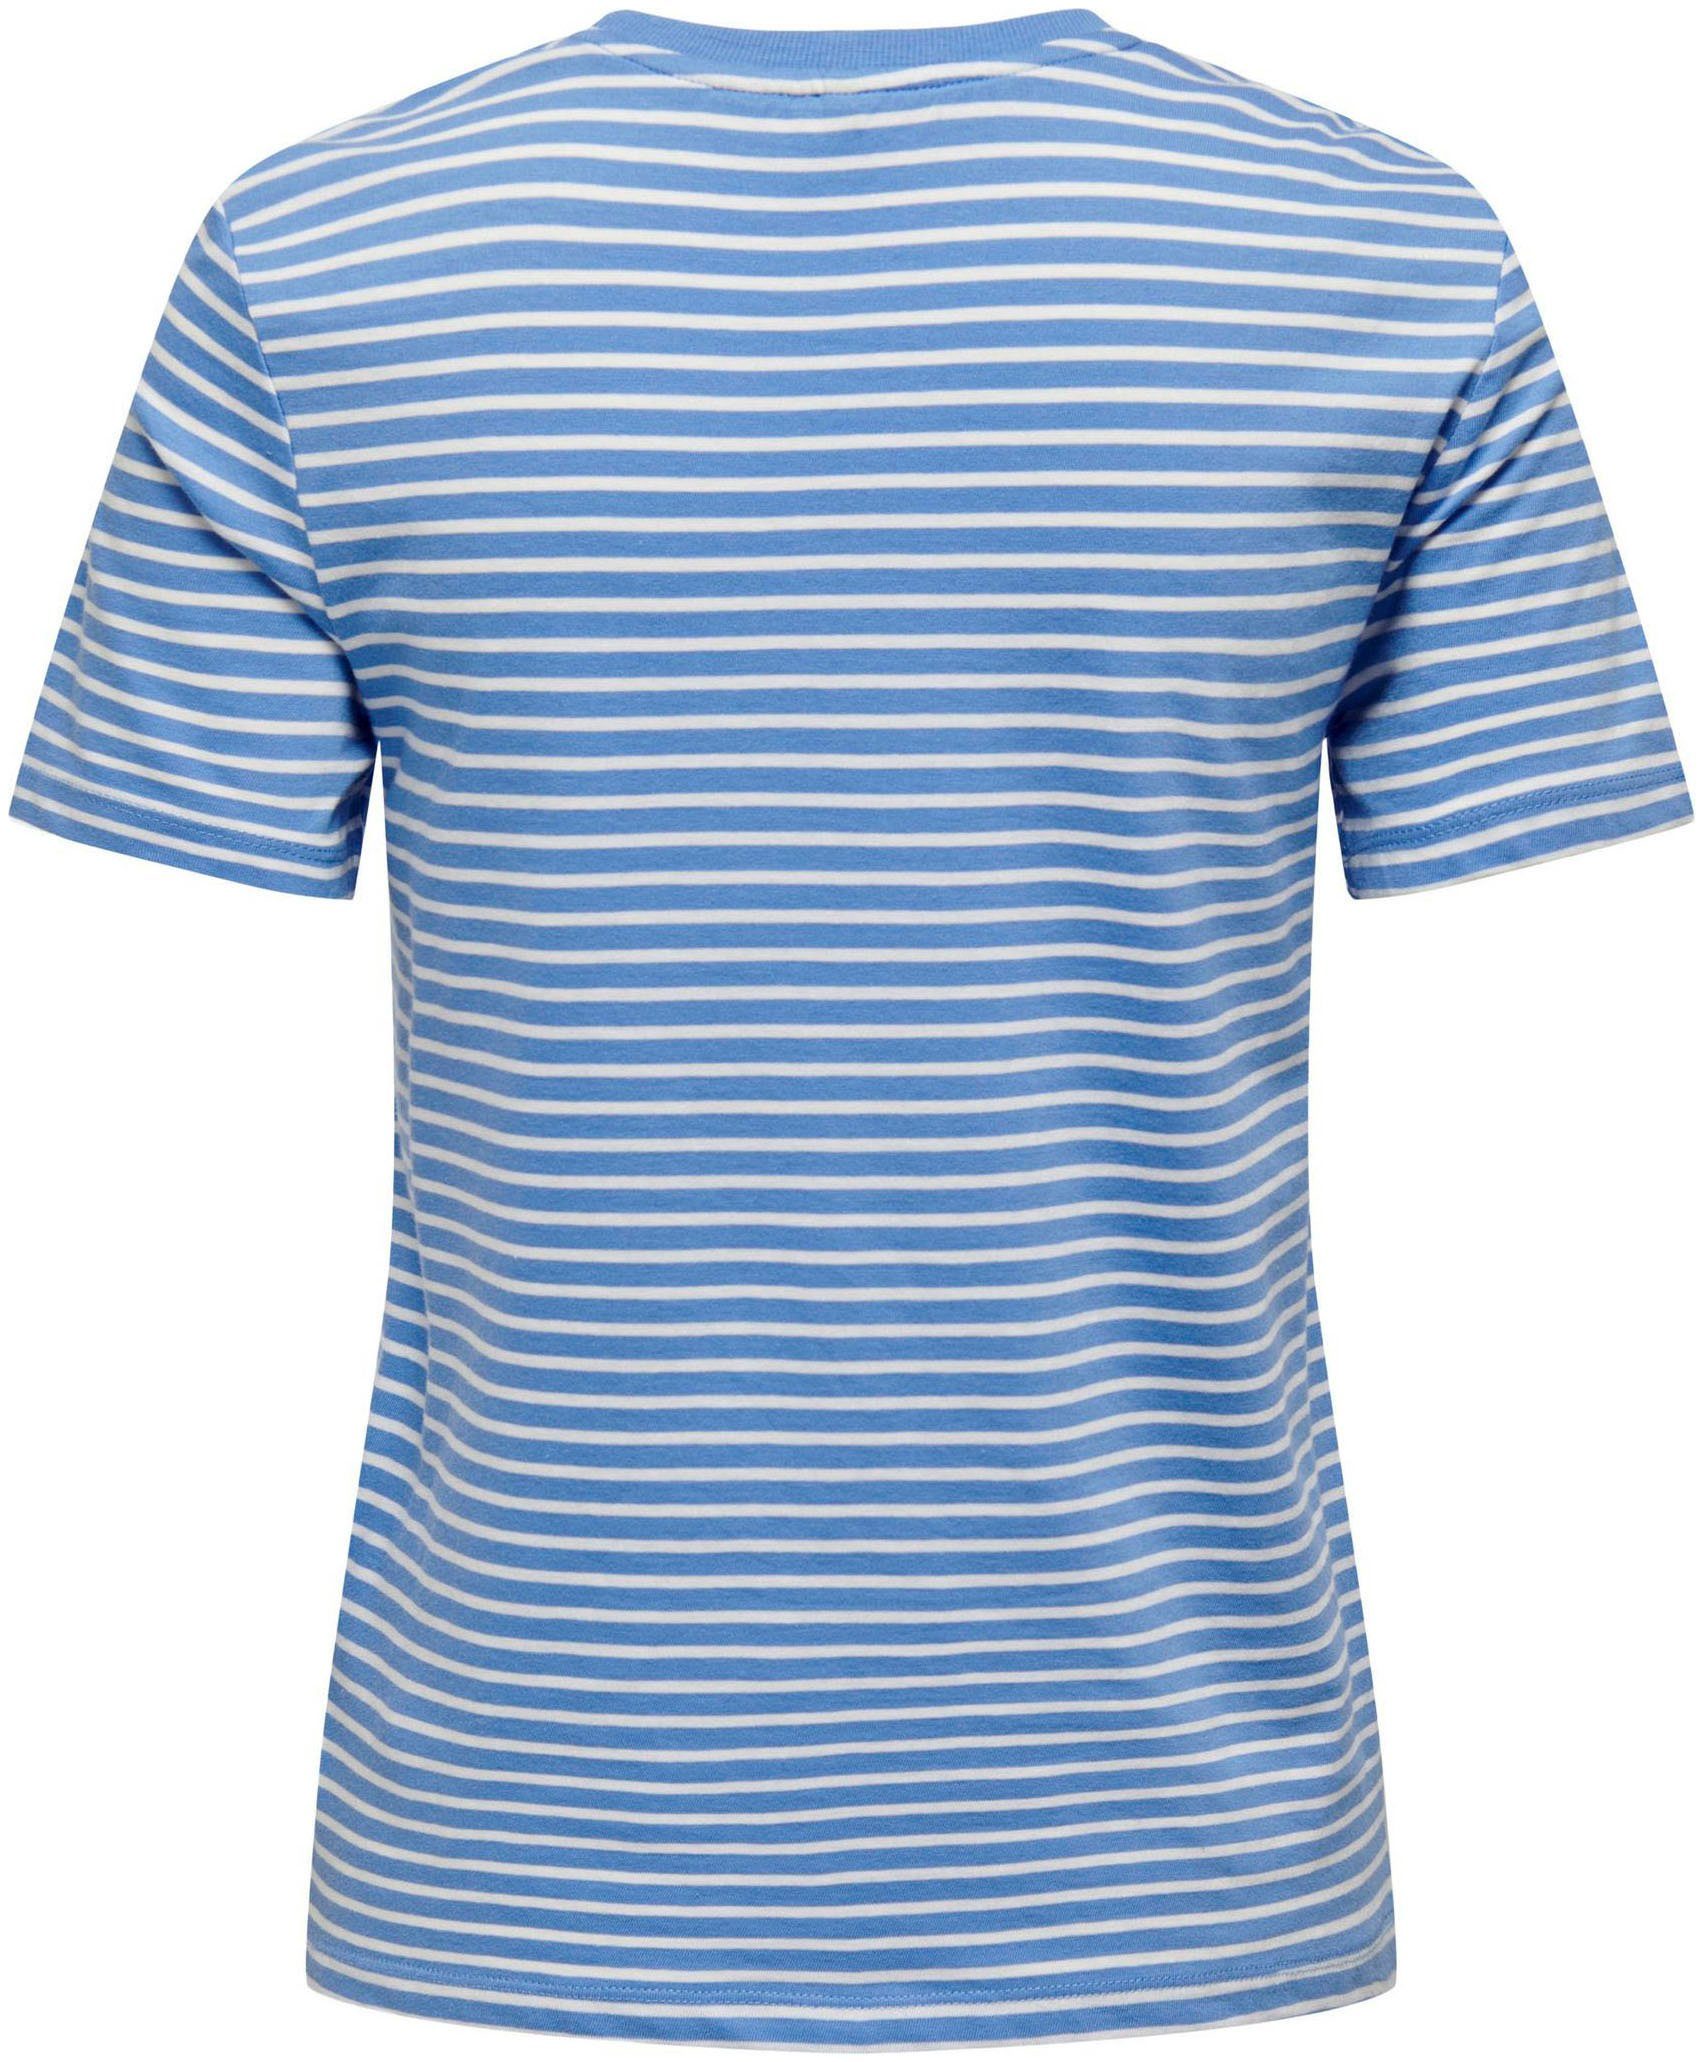 ONLY Rundhalsshirt ONLWEEKDAY REG Provence S/S red) risk TOP JRS (high love Print:In STRIPE BOX